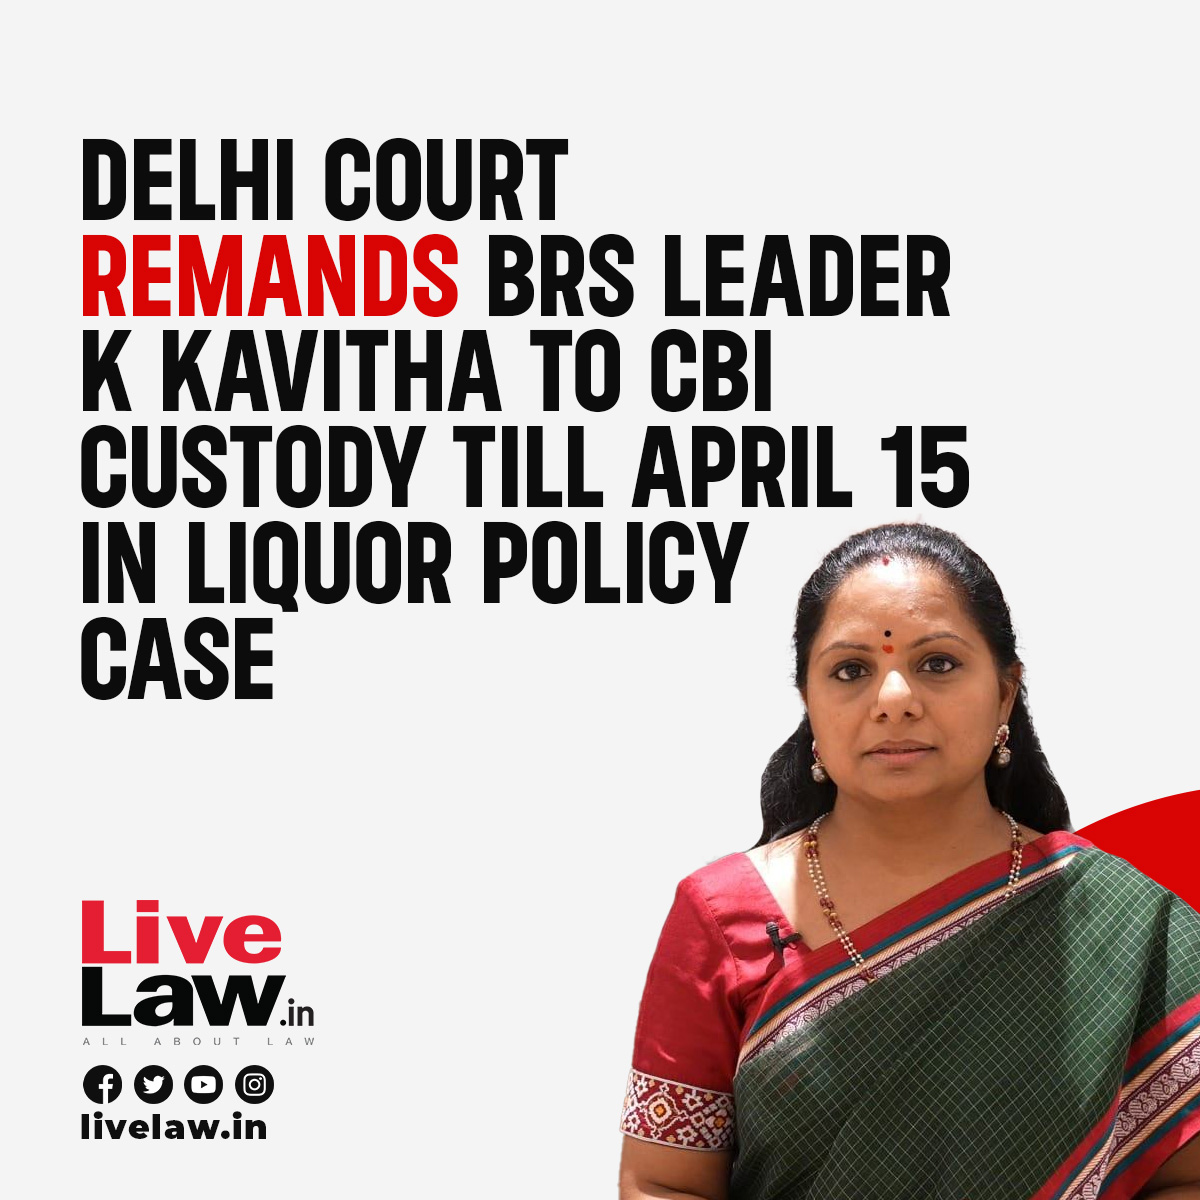 A Delhi Court on Friday remanded BRS leader K Kavitha to Central Bureau of Investigation (CBI) custody till April 15 in the alleged liquor policy scam.

Read more: t.ly/pd7xs

#KKavitha #BRS #CBI #LiquorPolicyScam